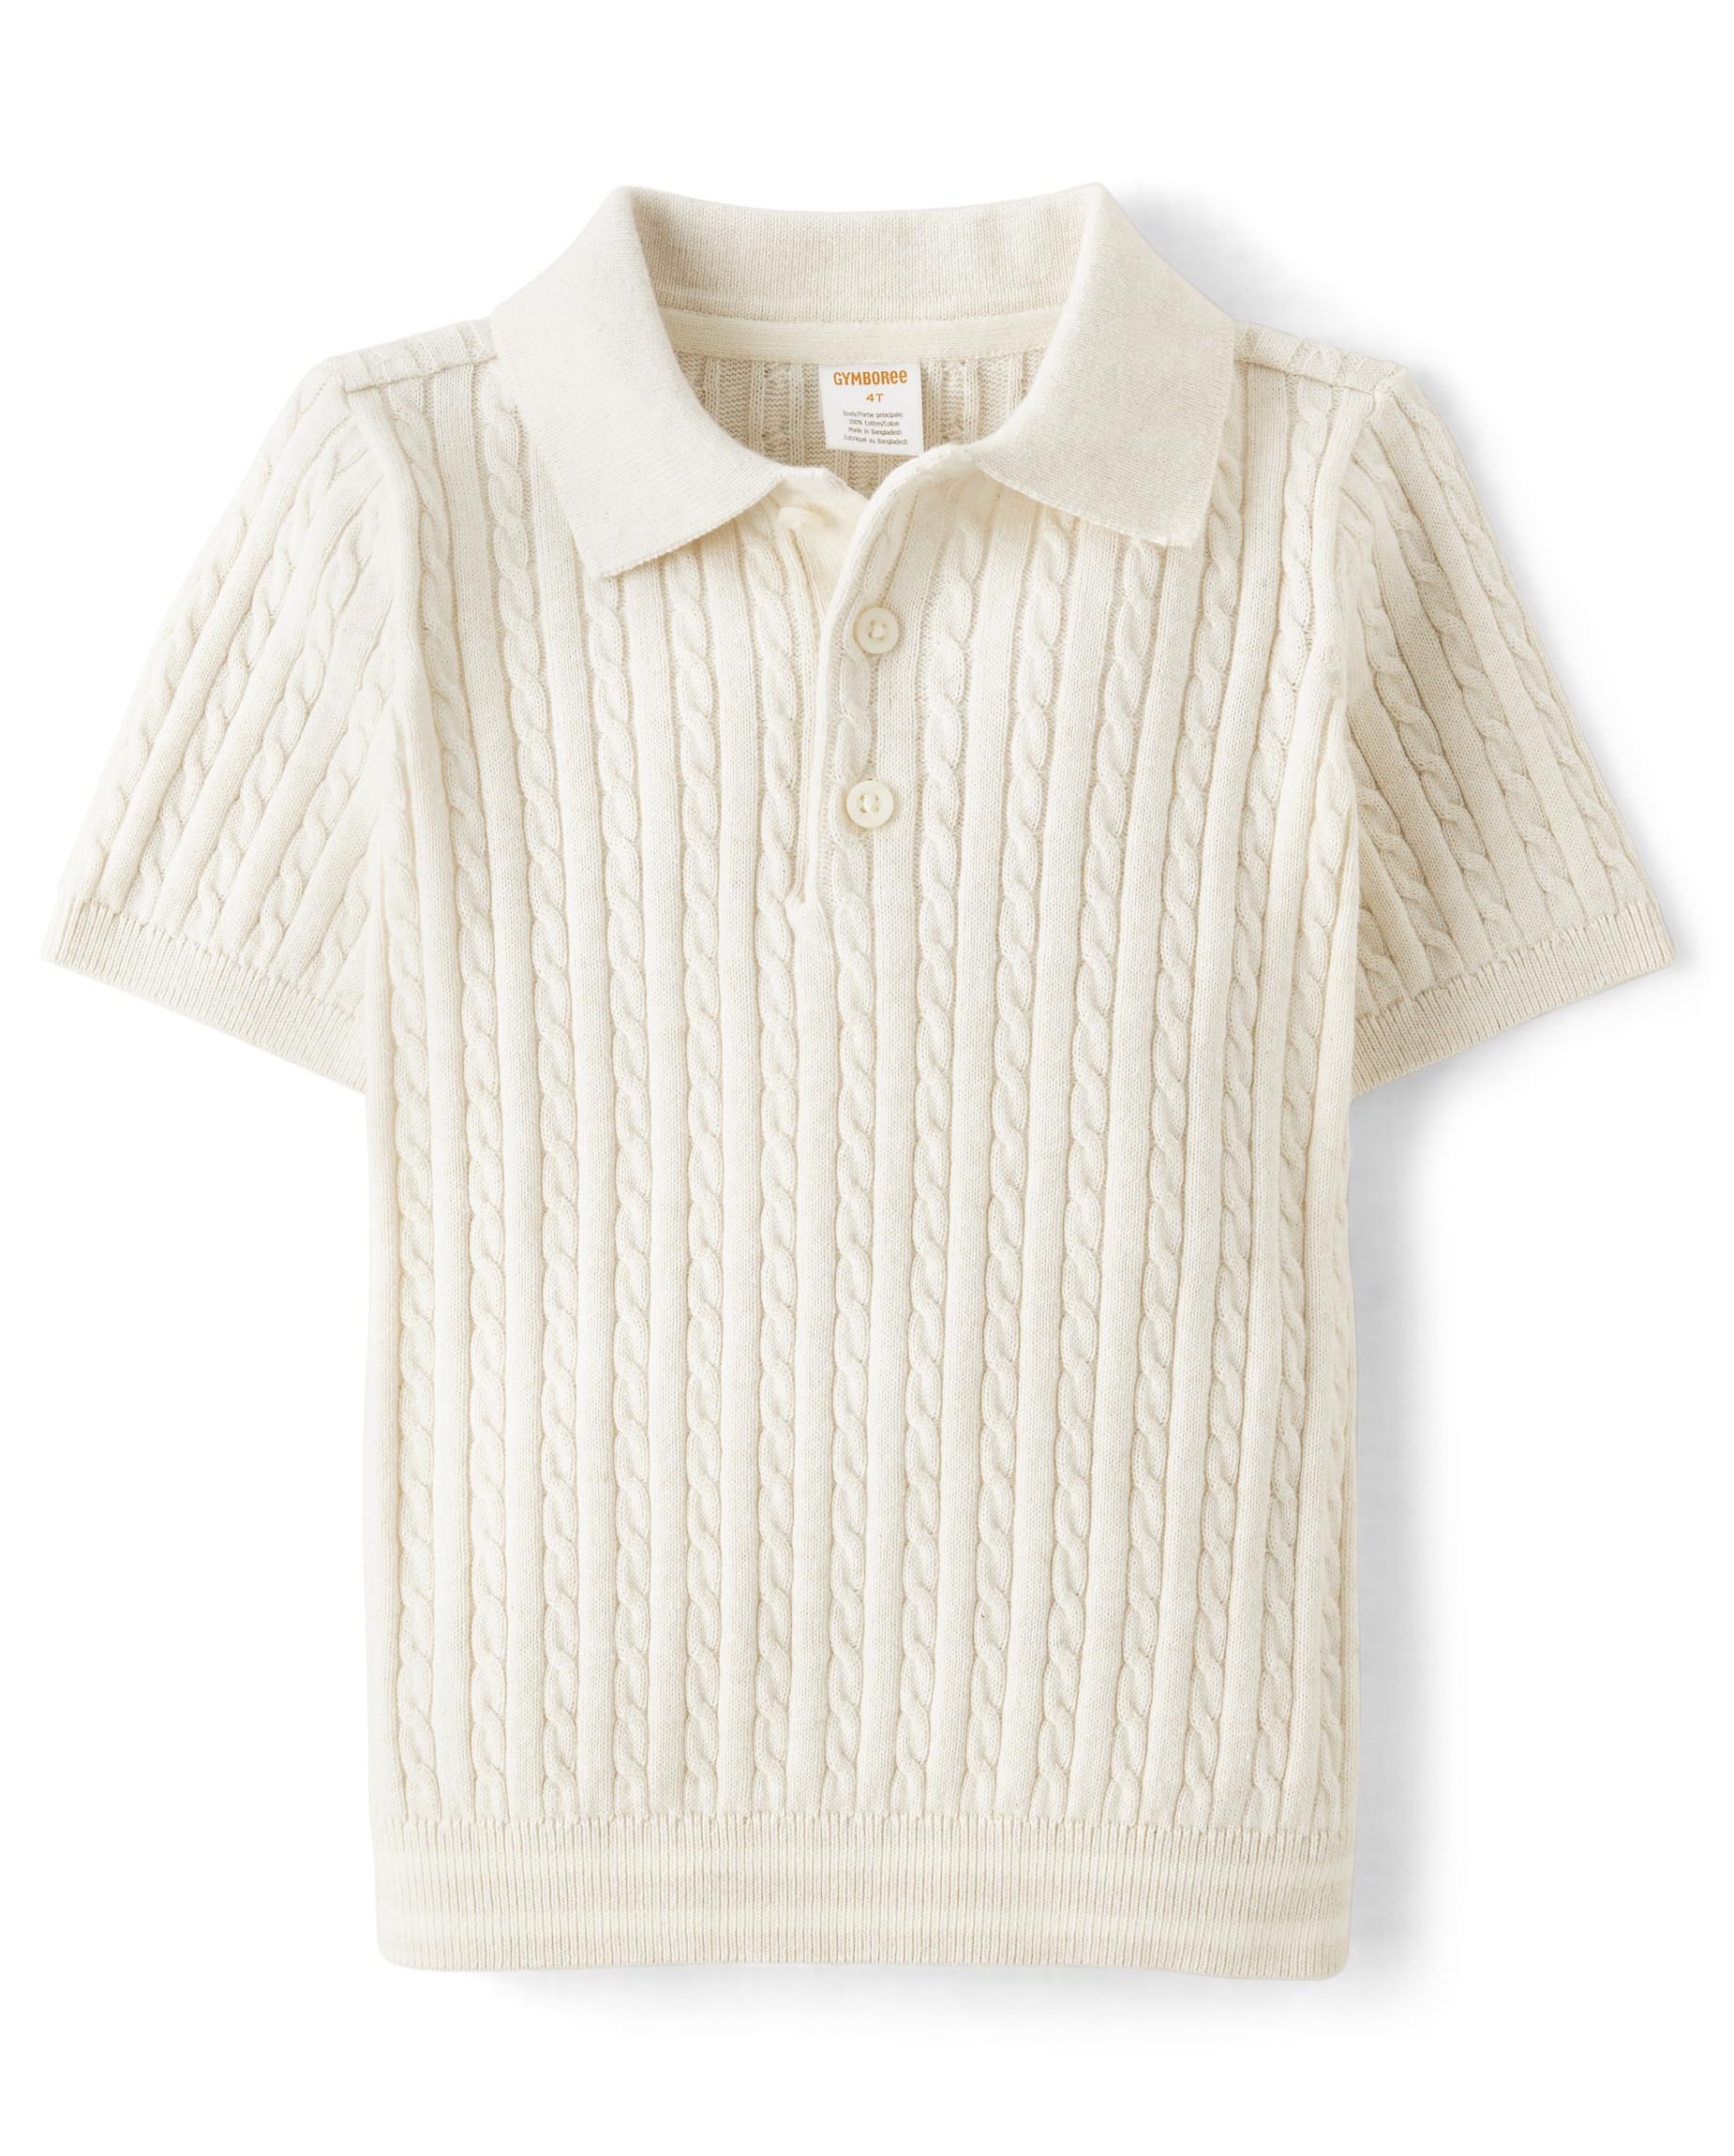 Gymboree Boys' and Toddler Short Sleeve Knit Sweater Polo Shirt